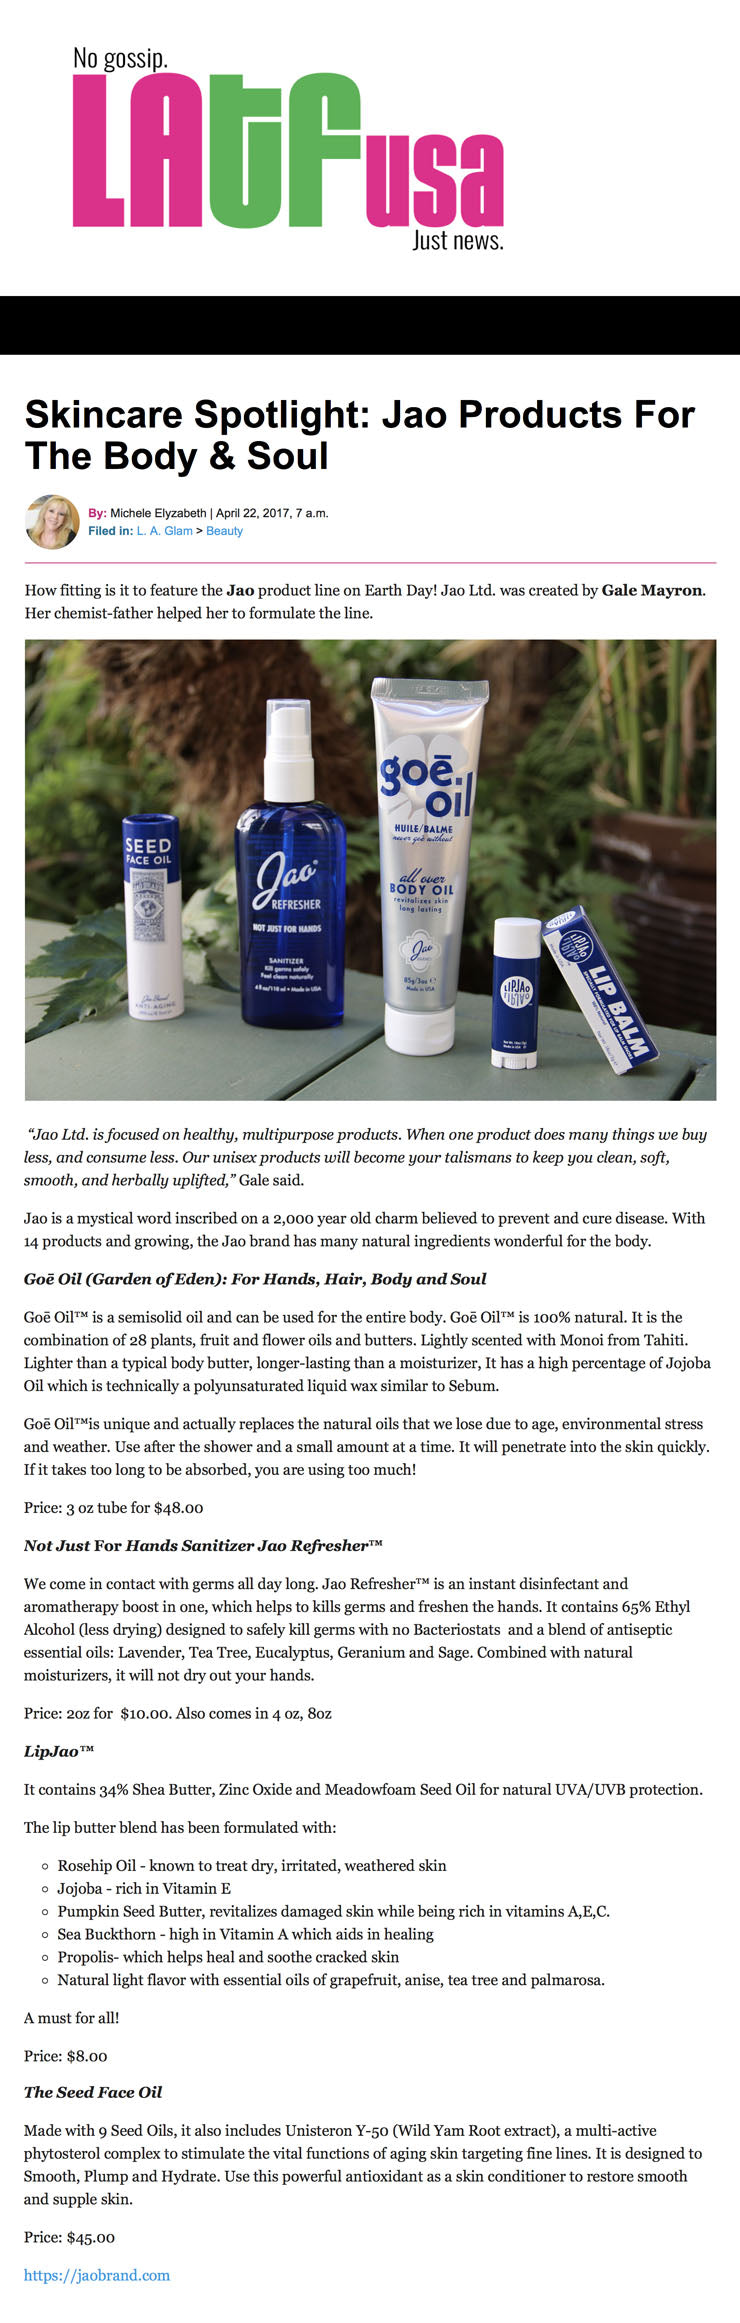 Laftusa - Skincare Spotlight: Jao Products For The Body & Soul